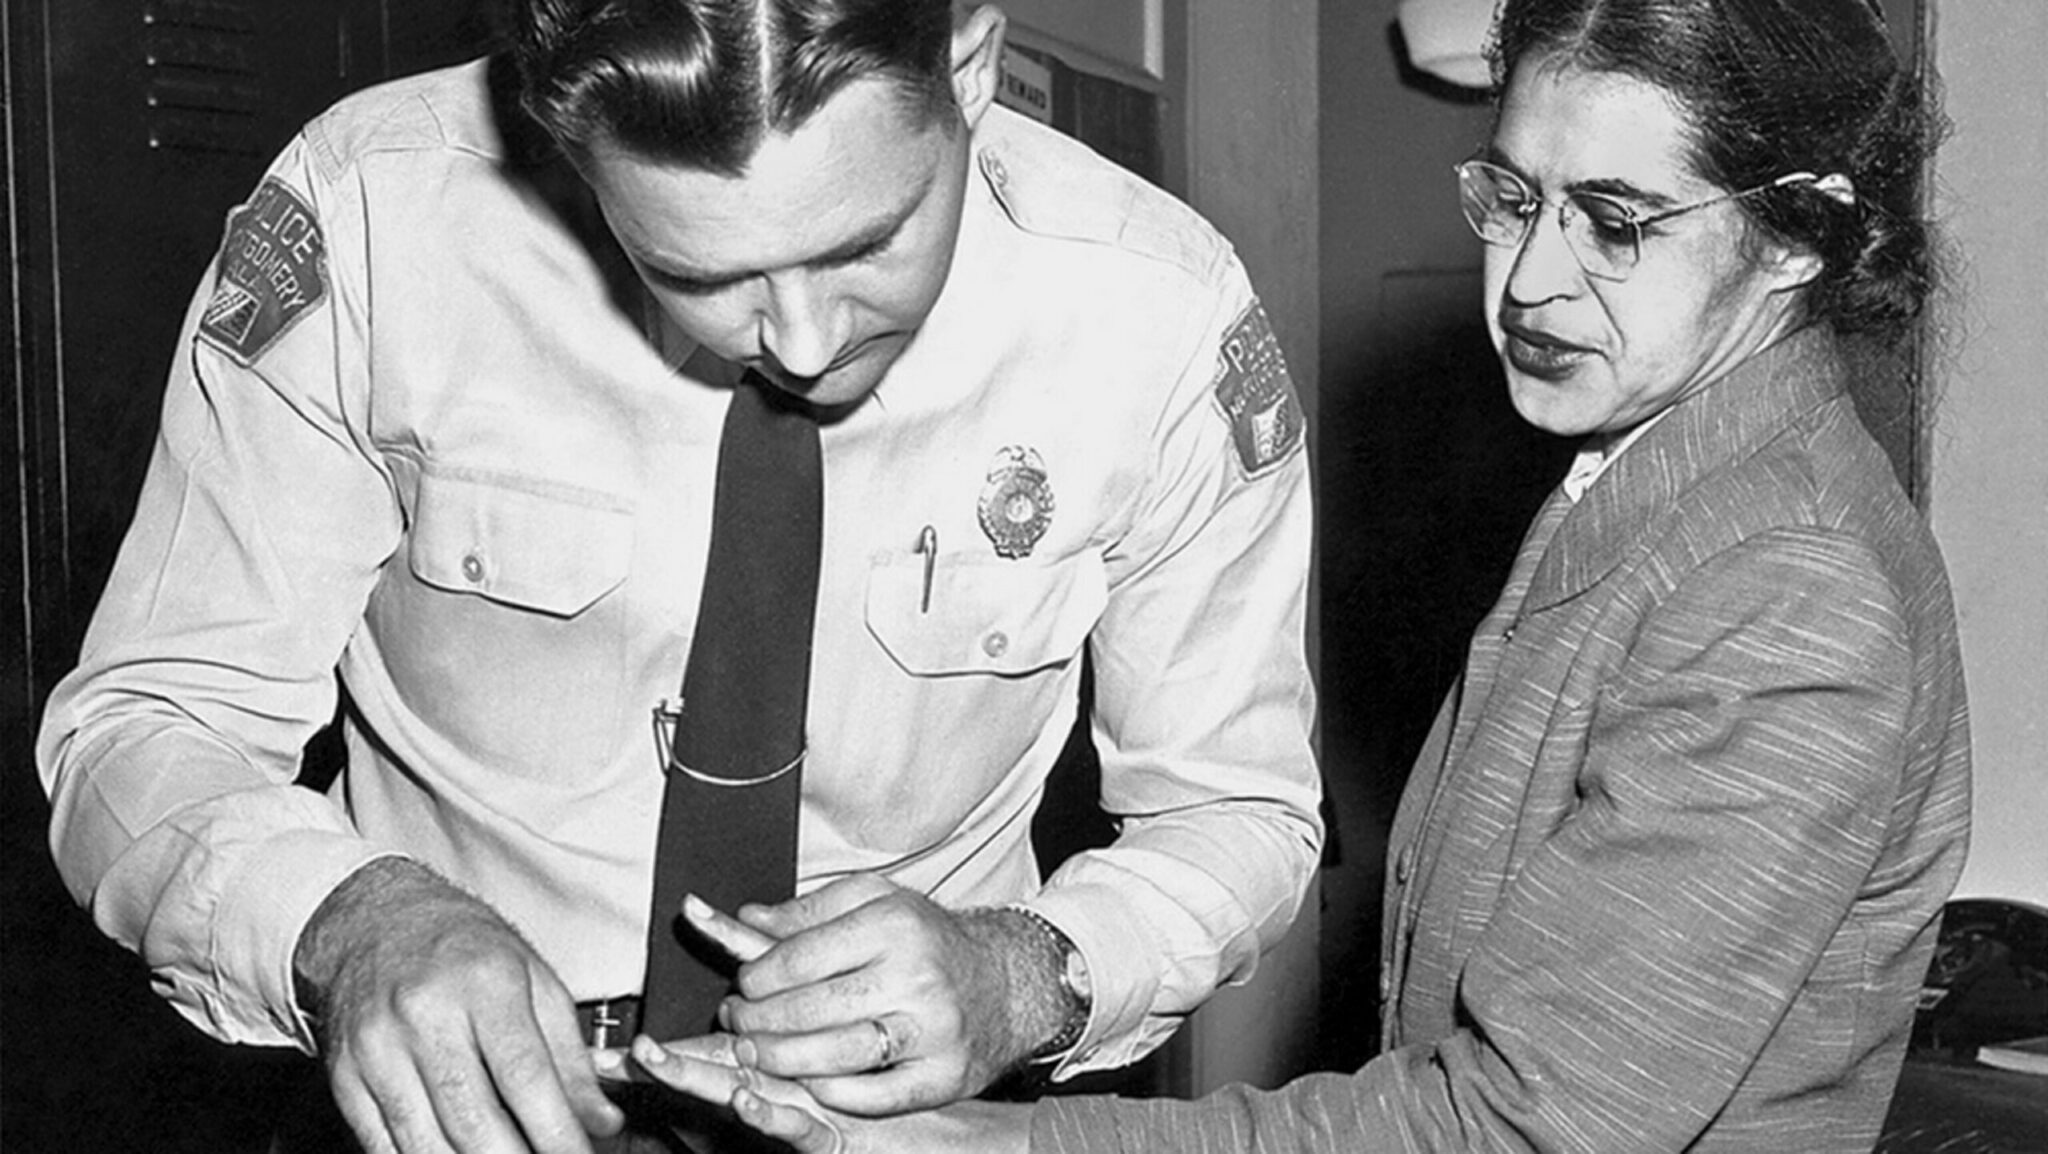 how did the black community know what to do during the montgomery bus boycott scaled